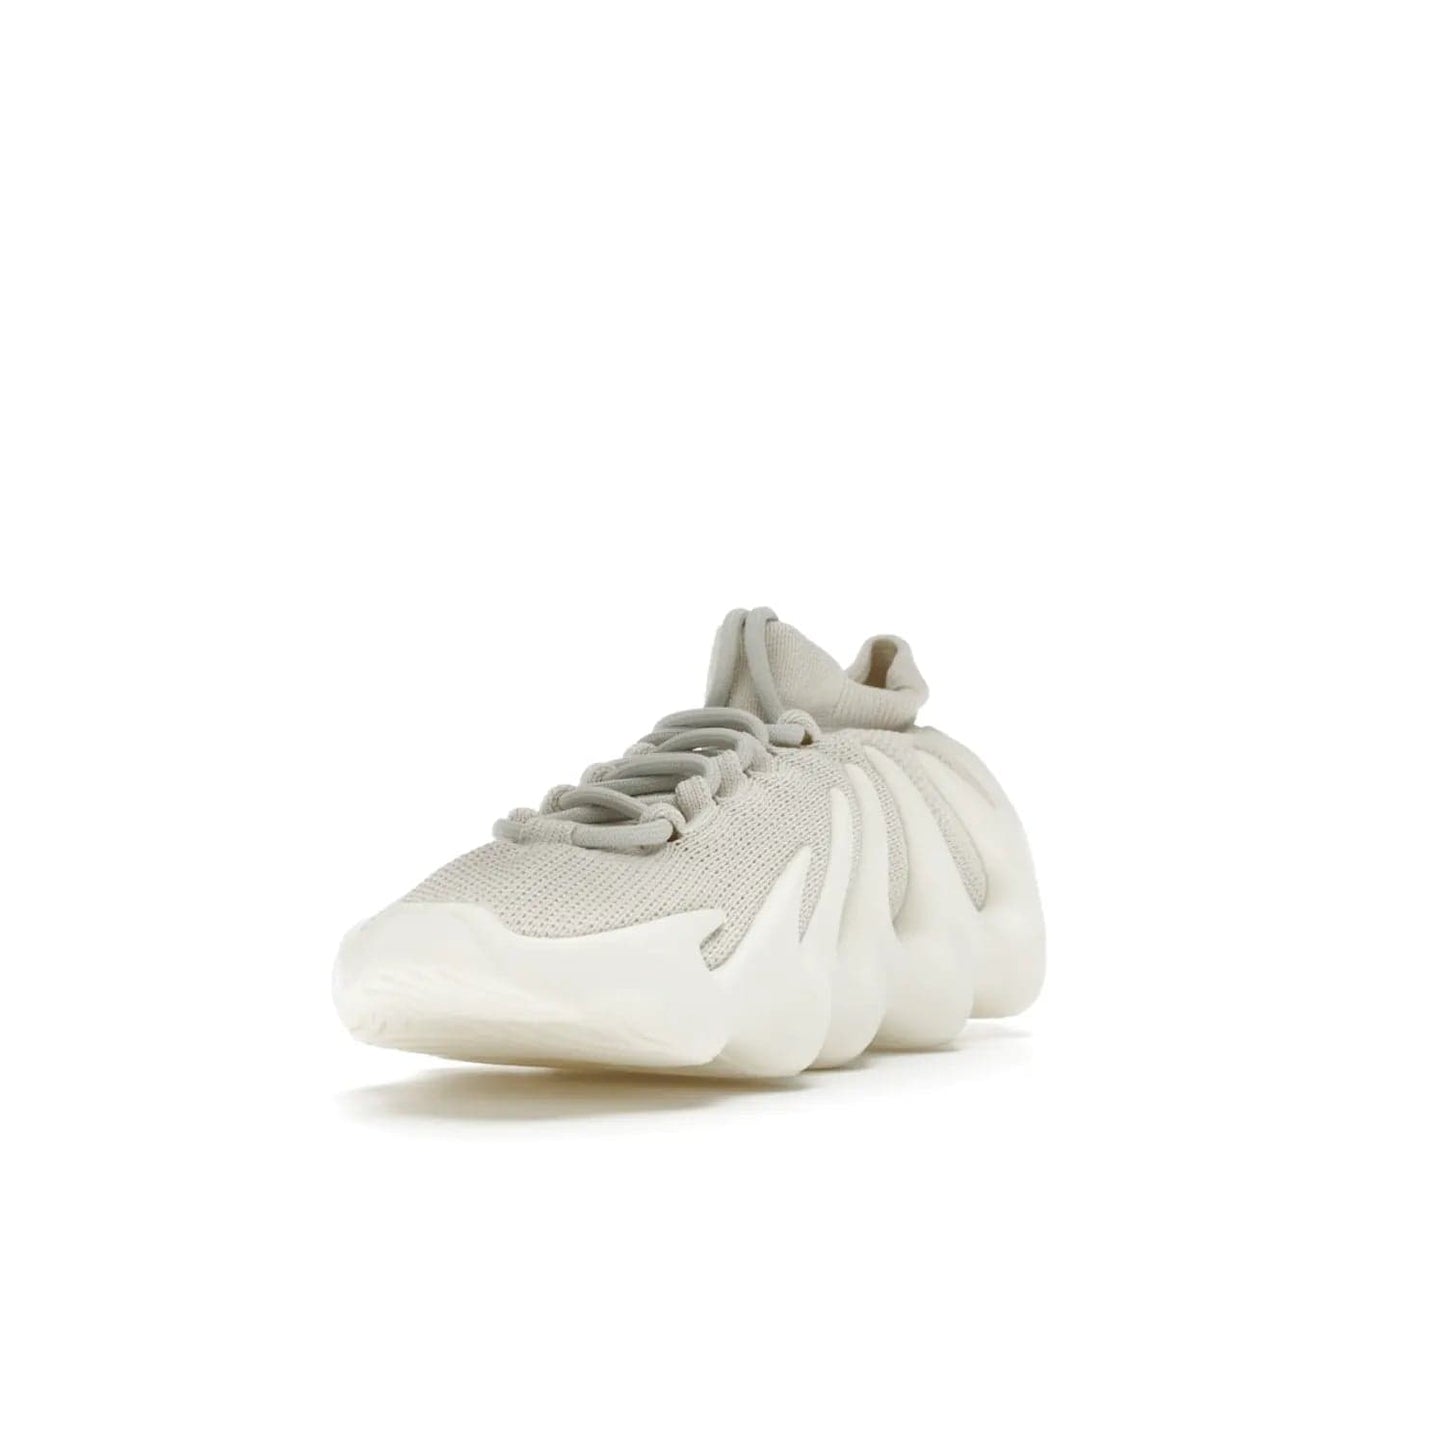 adidas Yeezy 450 Cloud White - Image 13 - Only at www.BallersClubKickz.com - Experience the future with the adidas Yeezy 450 Cloud White. A two-piece design featuring an extreme foam sole and mesh upper, this silhouette is expected to release in March 2021. Get your hands on this striking Cloud White/Cloud White colorway and stand out in the crowd.